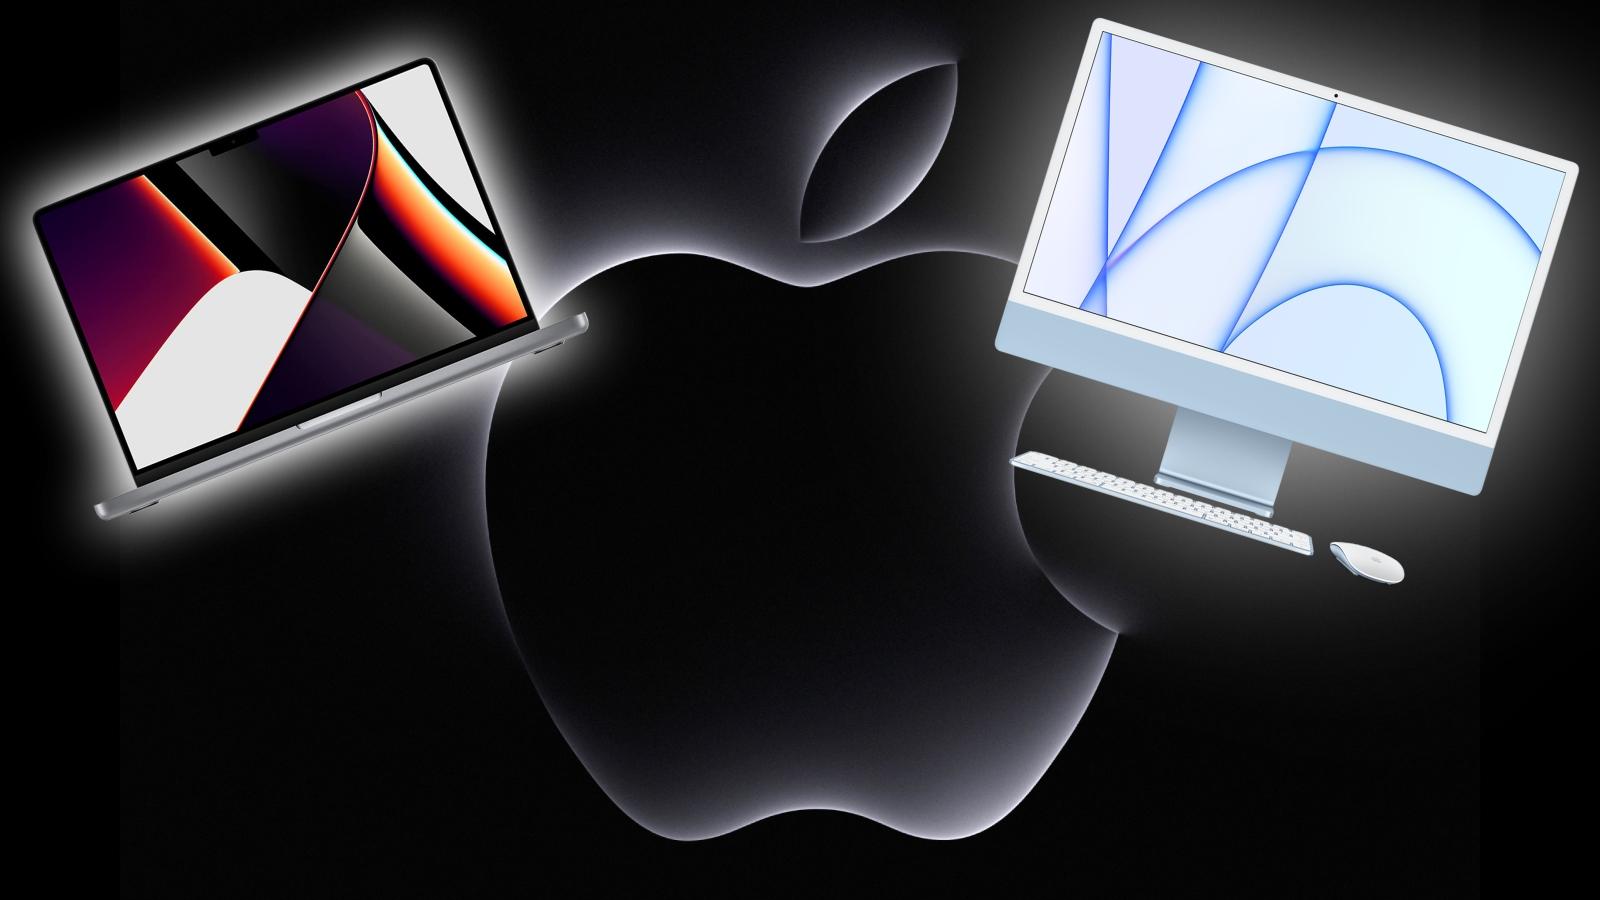 Apple Logo on black background with iMac and MacBook Pro